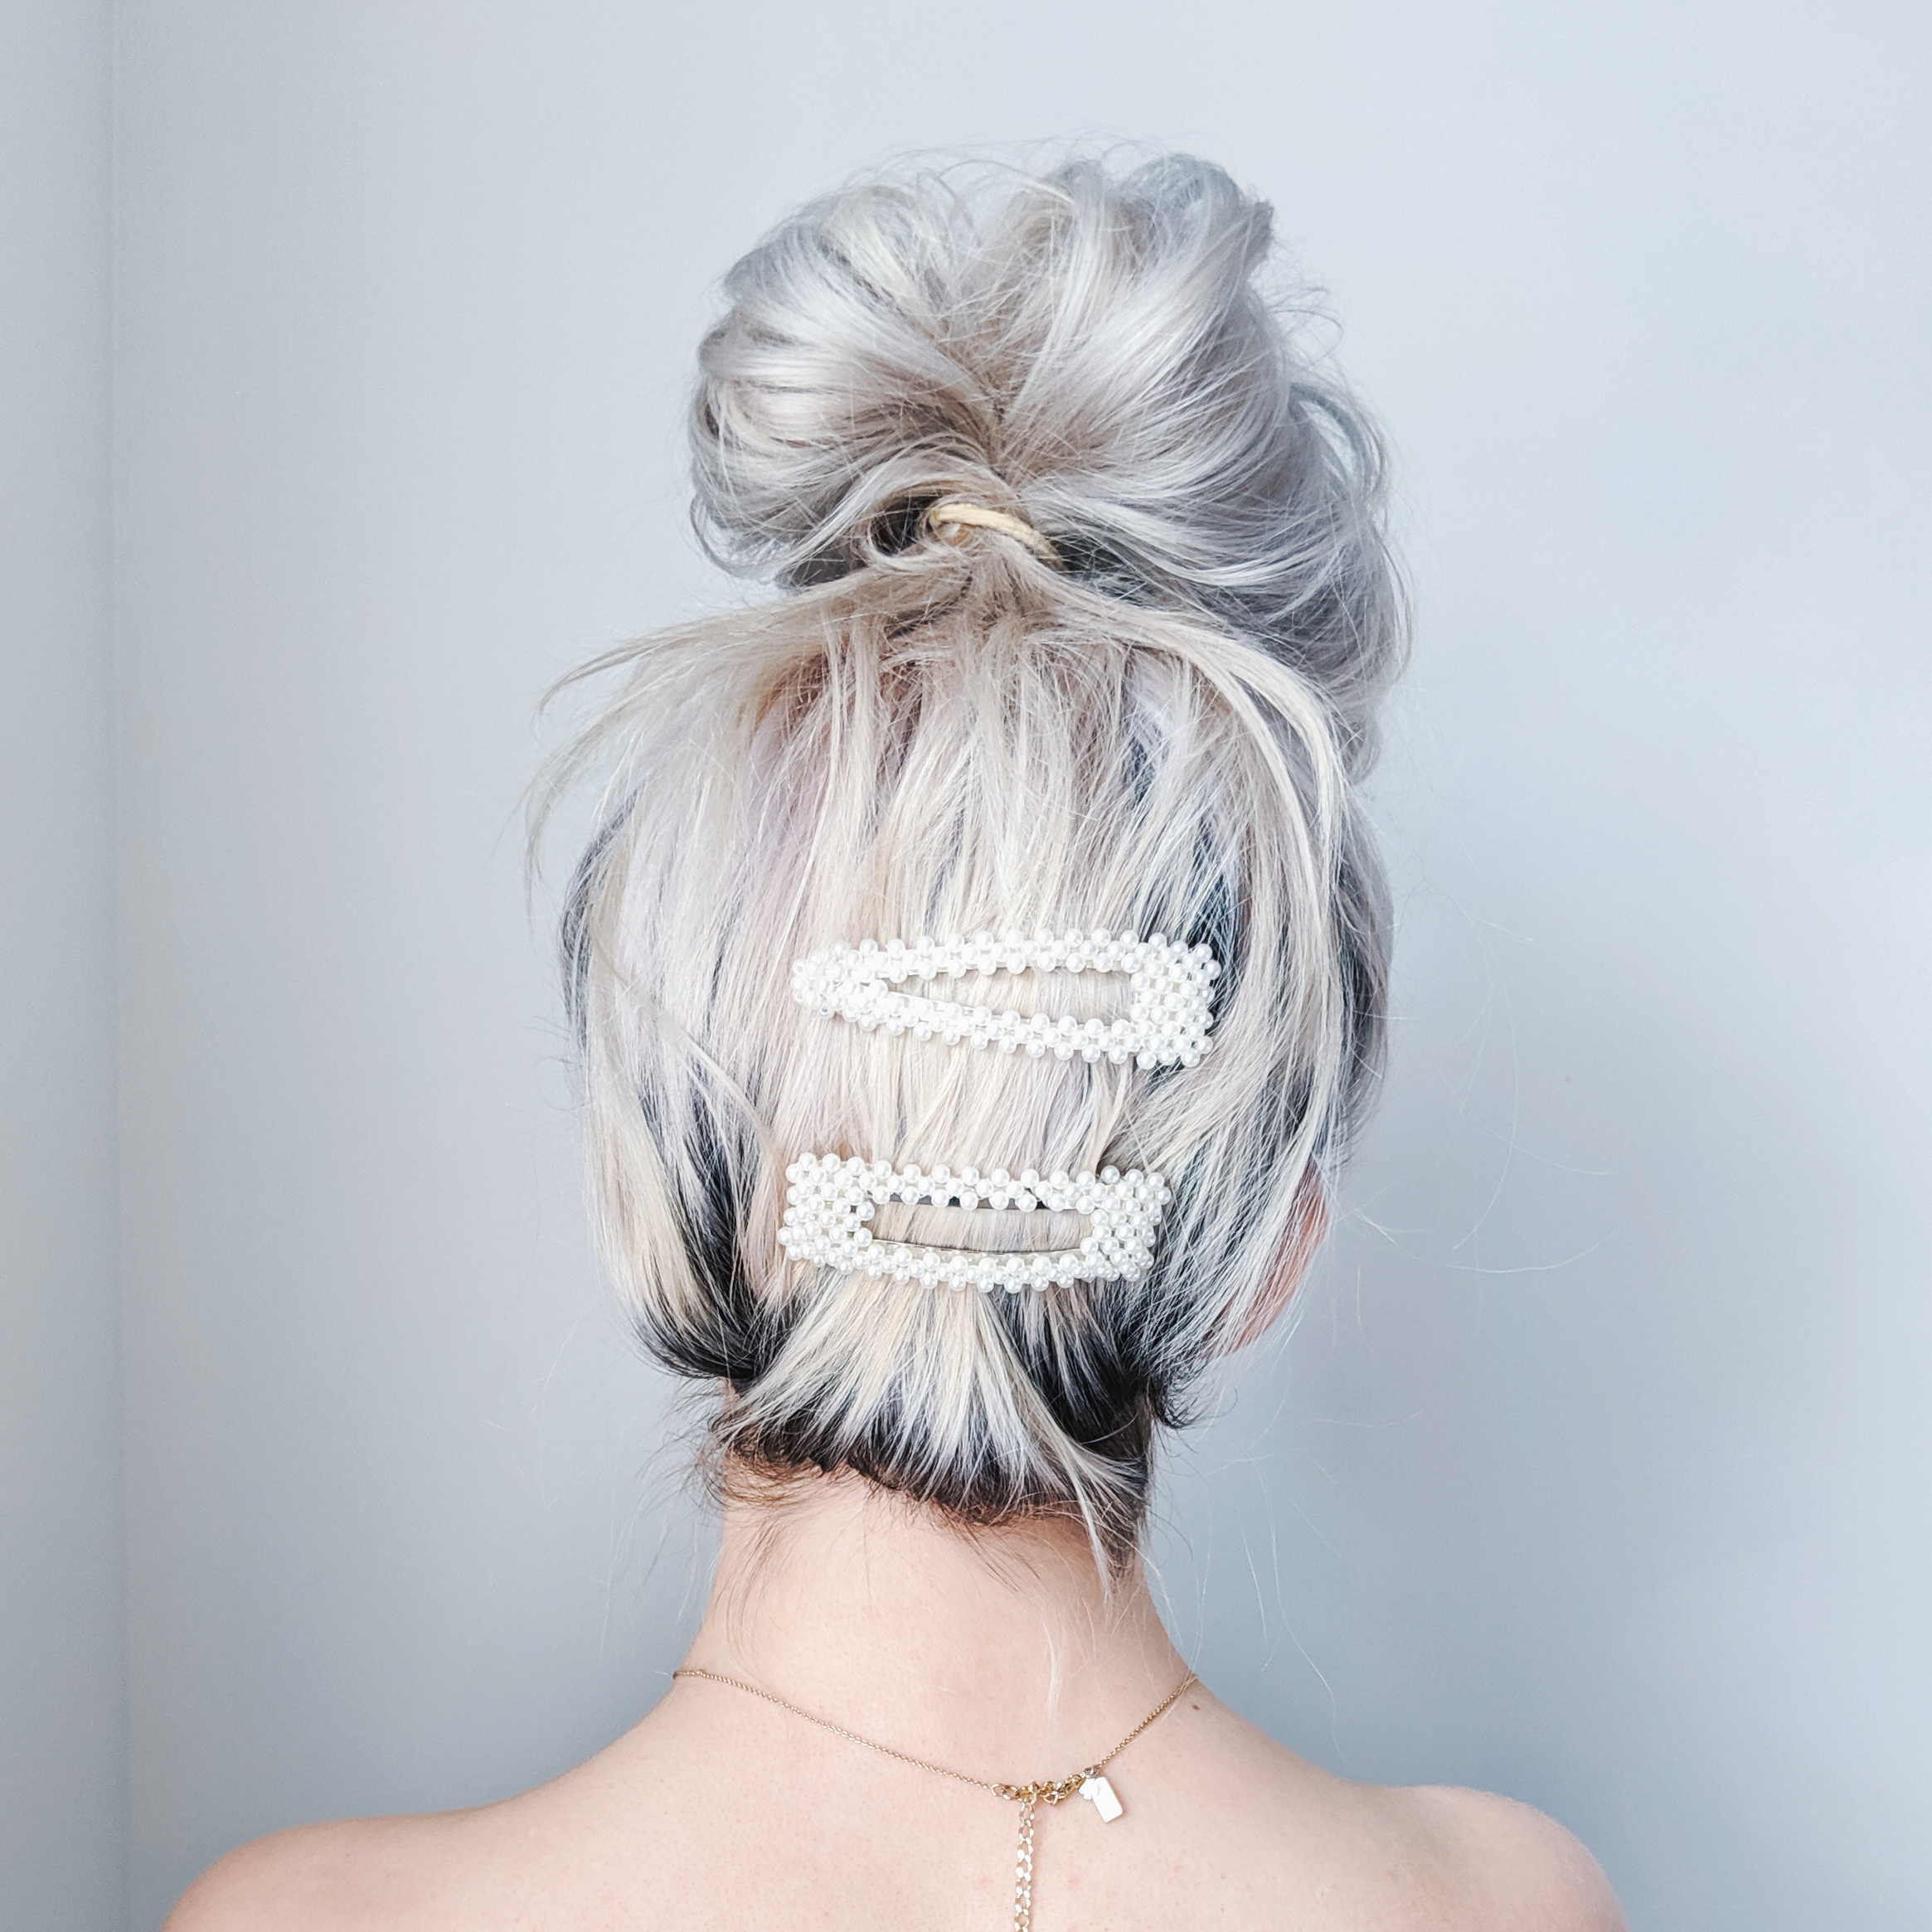 Pearl Barrette Hairstyles - Hair Styles for Pearl Clips Barrettes: 5 hair styles you can do with pearl barrettes, the hottest of the 2019 hair trends! These easy hairstyles will elevate your look in seconds. #hairstyles #hairinspo #pearlbarrettes 